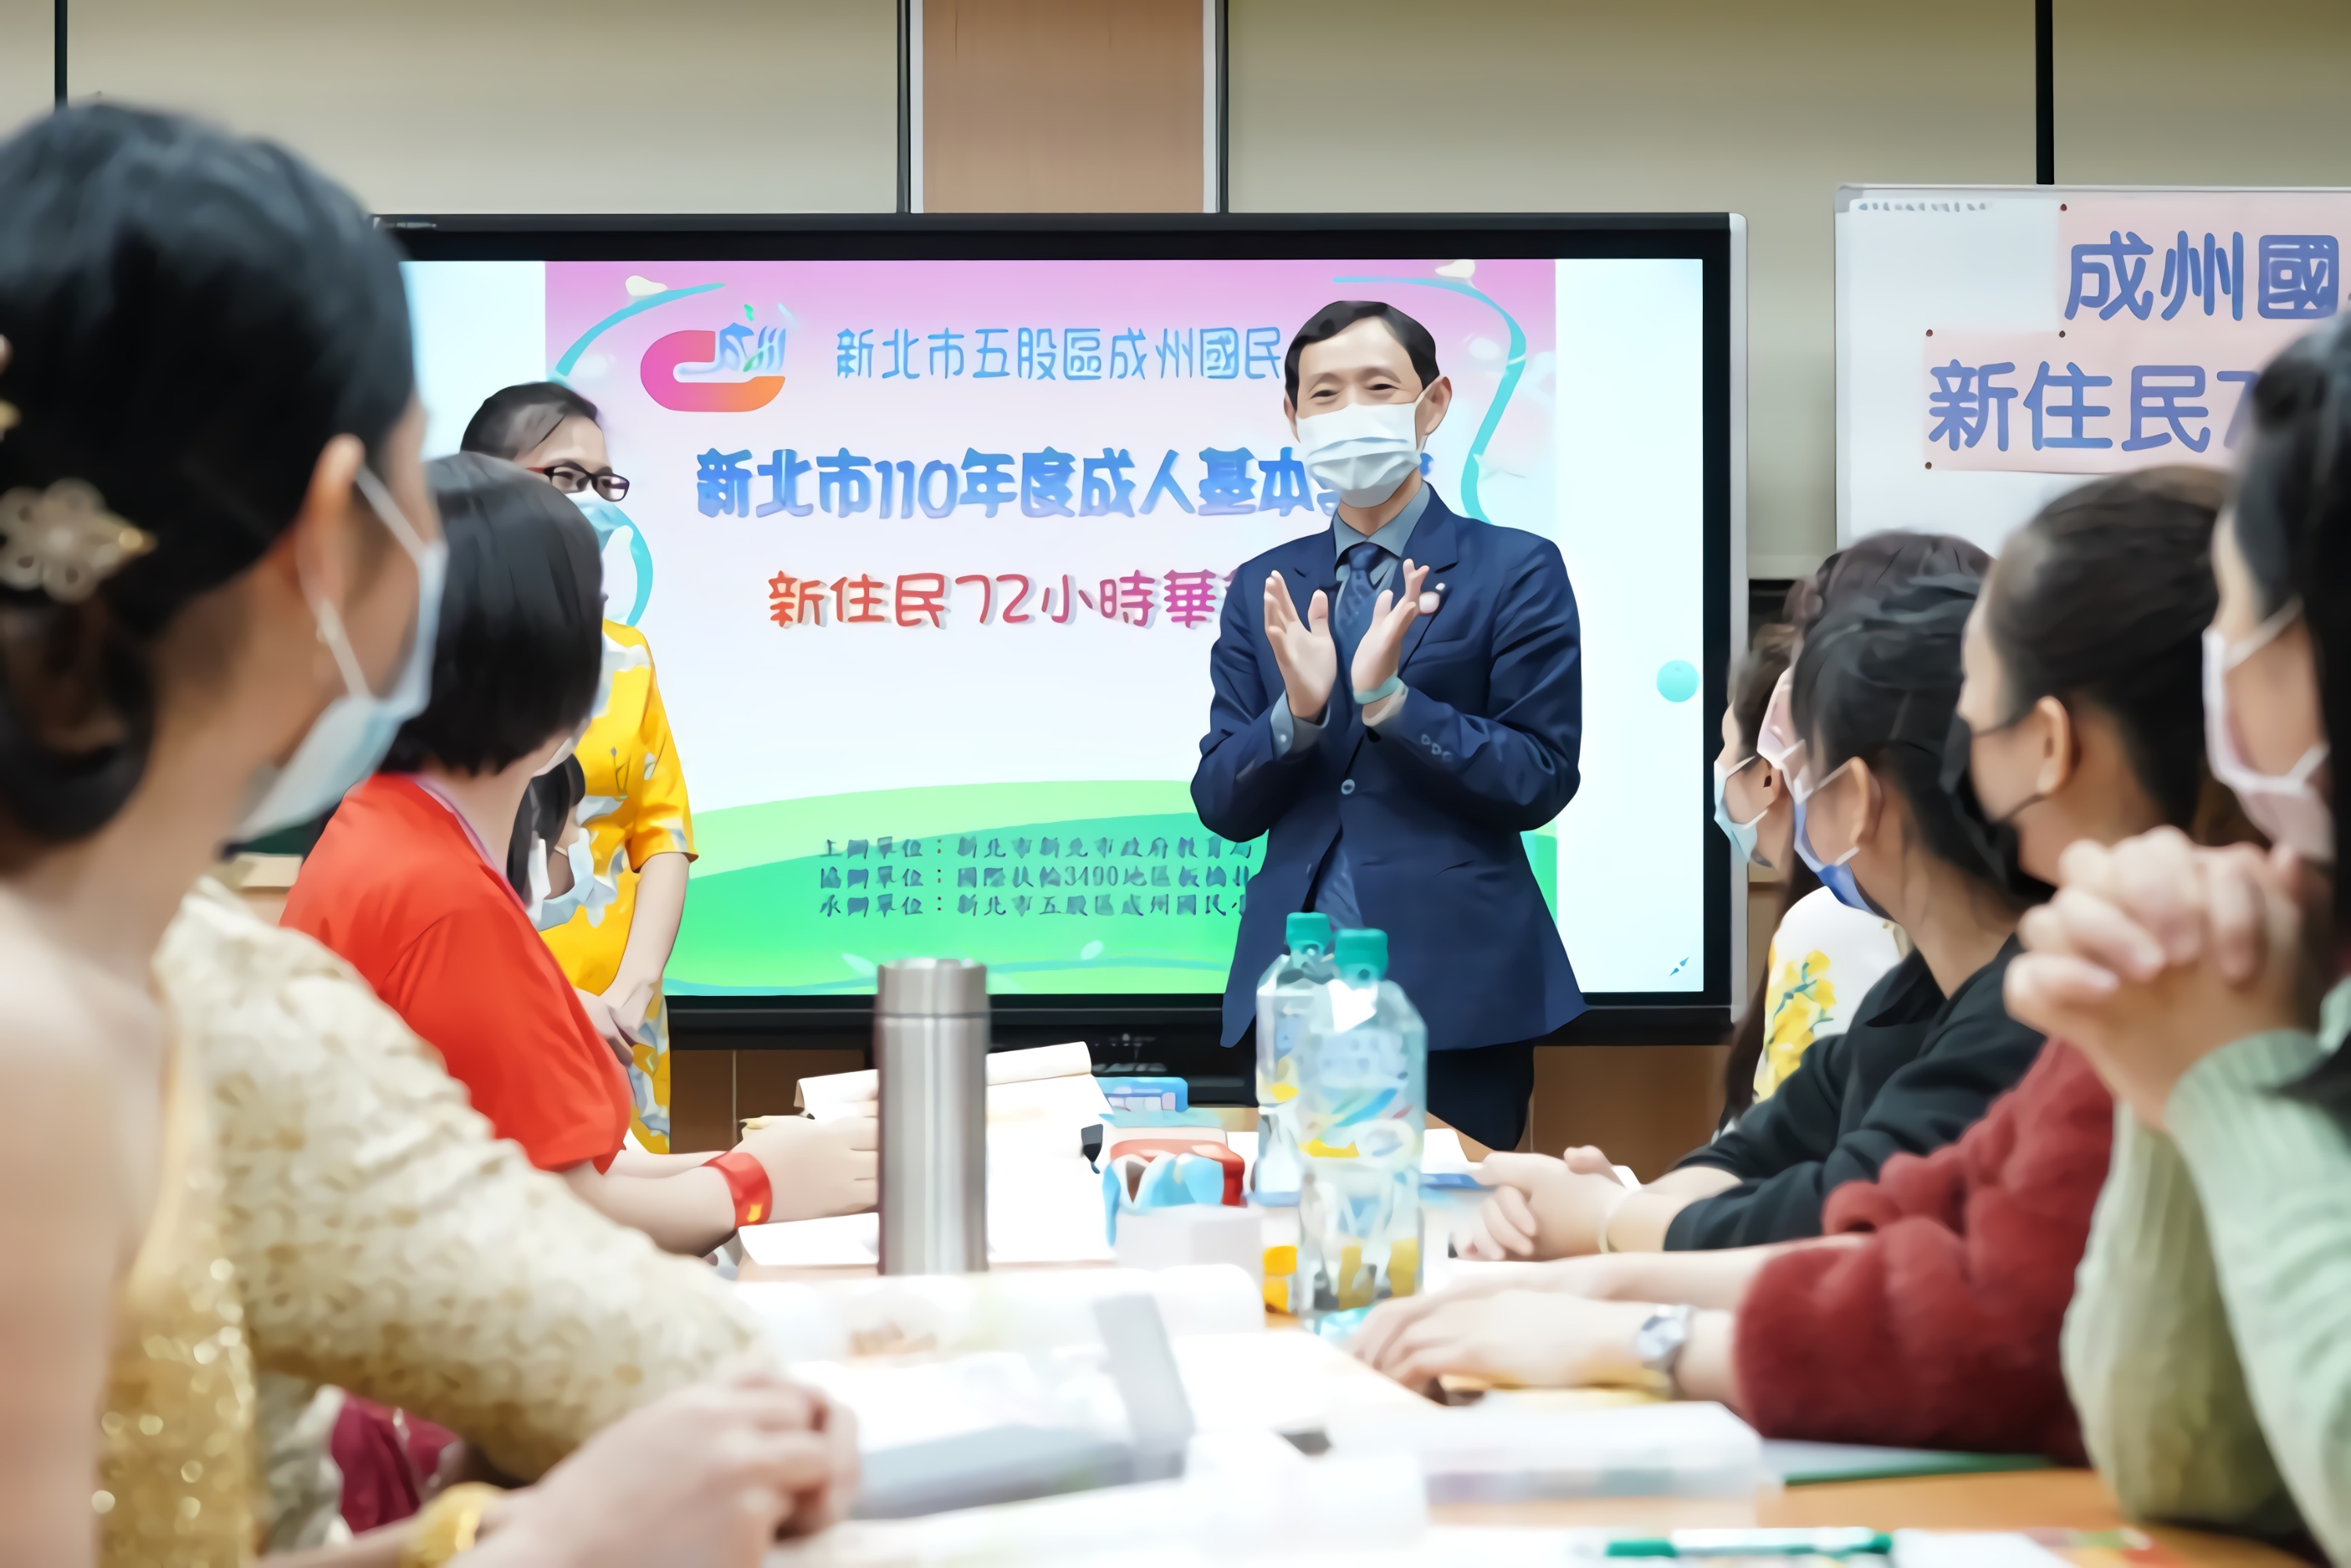 The New Taipei Campus launched the "Chinese Language Course" for new immigrants. (Photo / Provided by the New Taipei City Education Bureau)